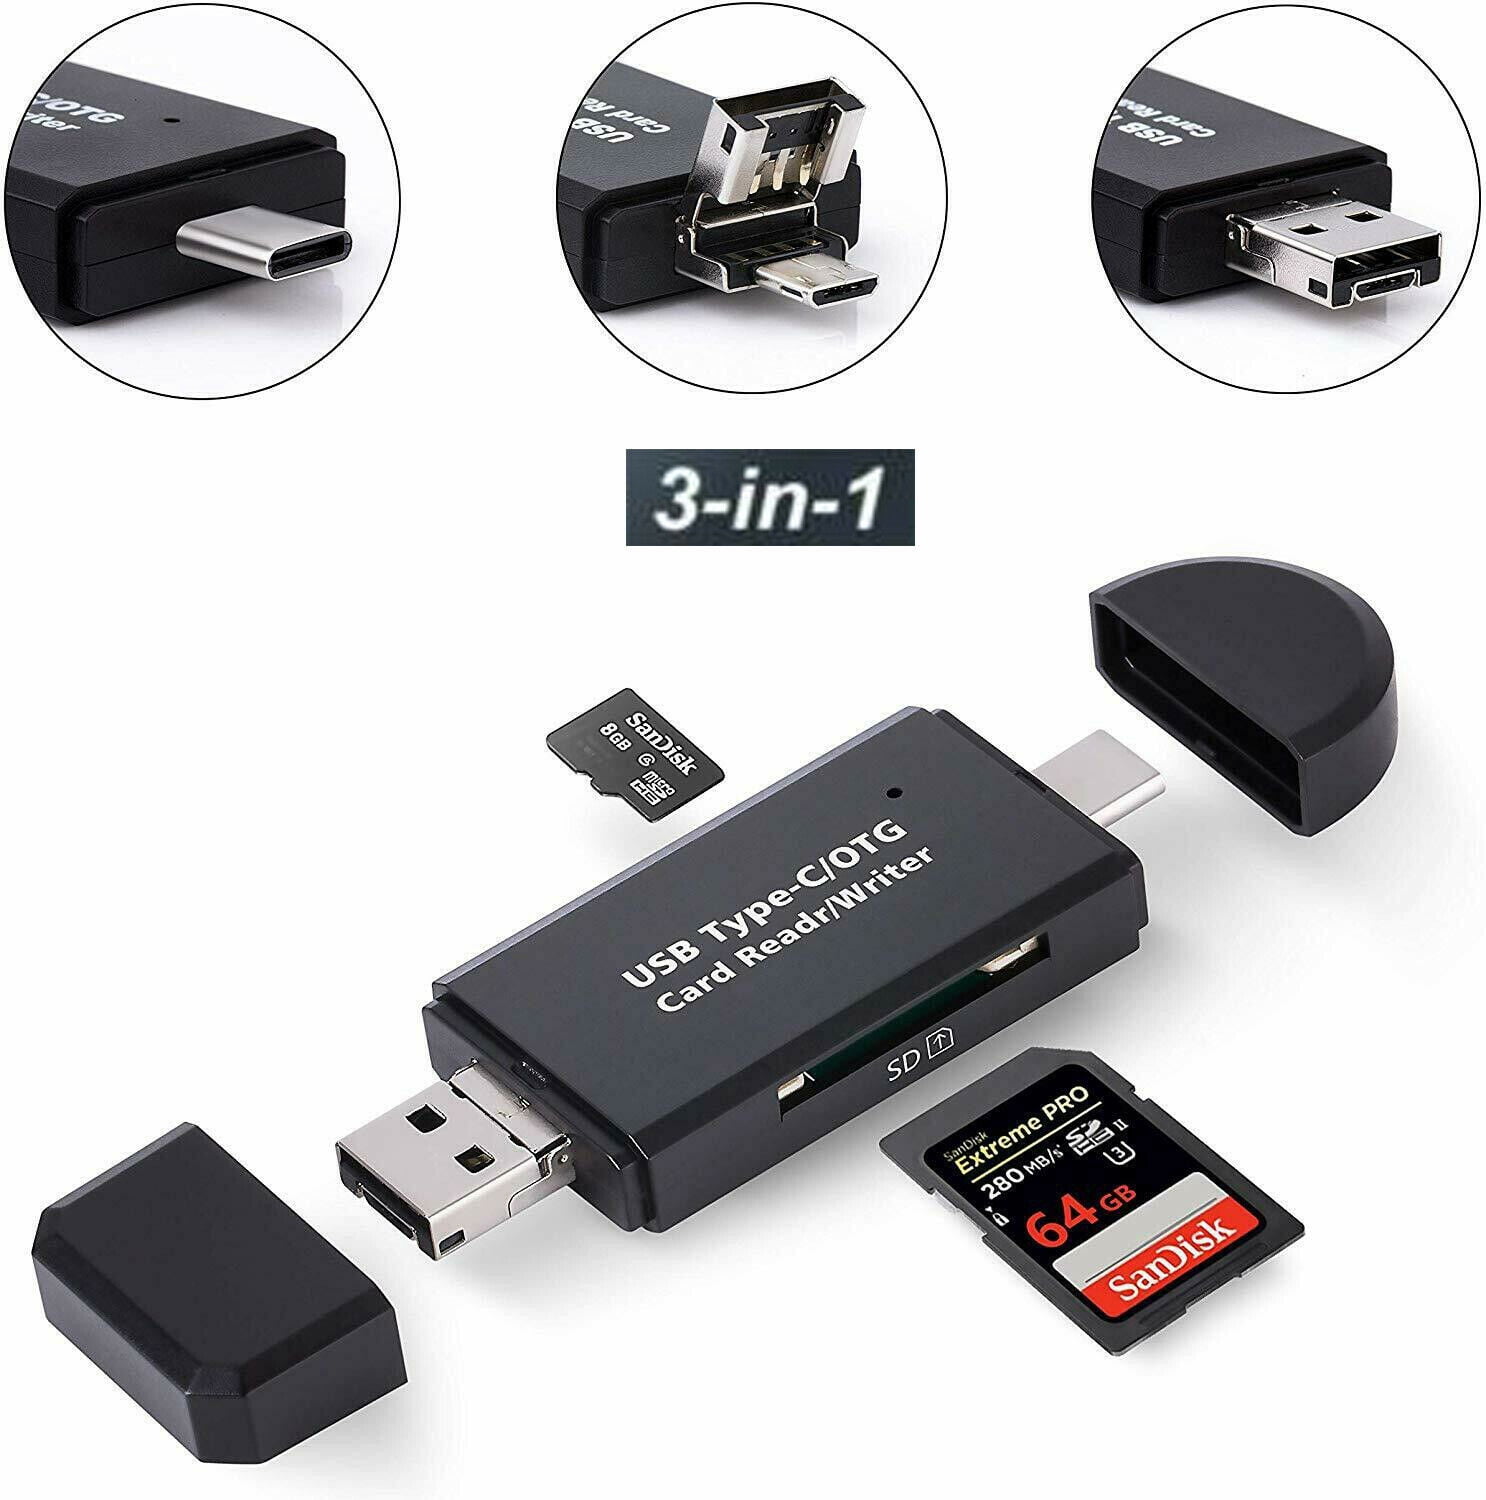 USB 2.0 Portable Card Reader for SDHC, SD, MMC, RS-MMC, All-in-One Design - USB 3.0 Micro SD and SD Reader - Walmart.com